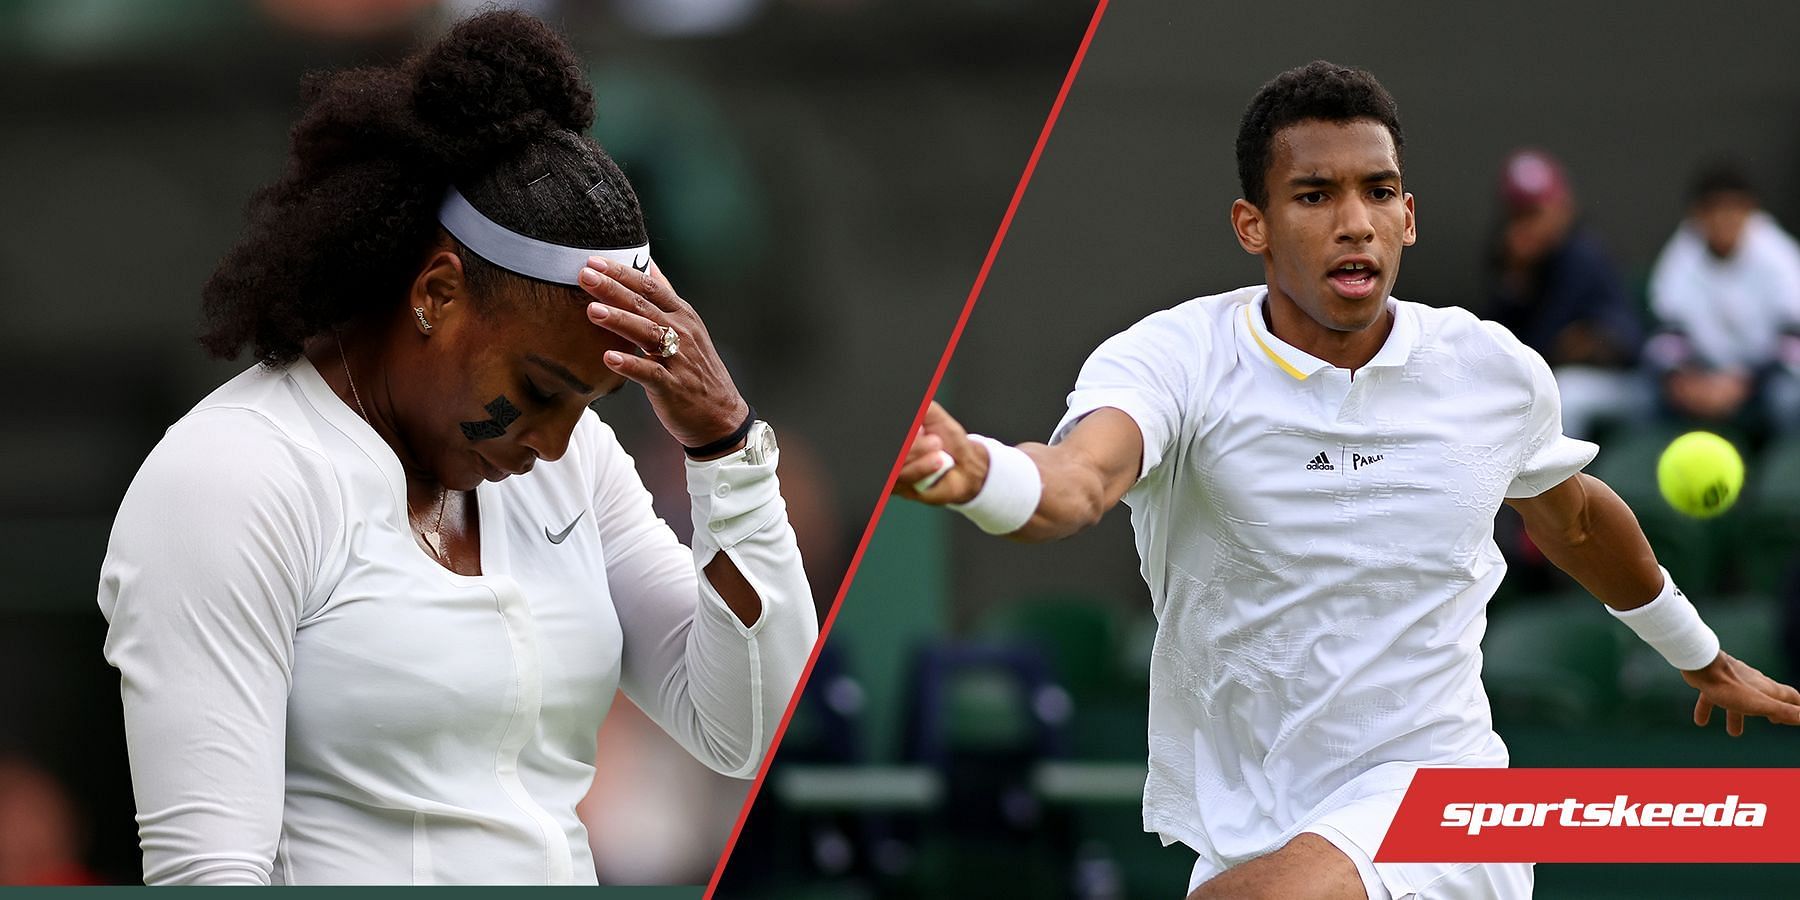 Serena Williams and Felix Auger-Aliassime suffered first-round exits at Wimbledon